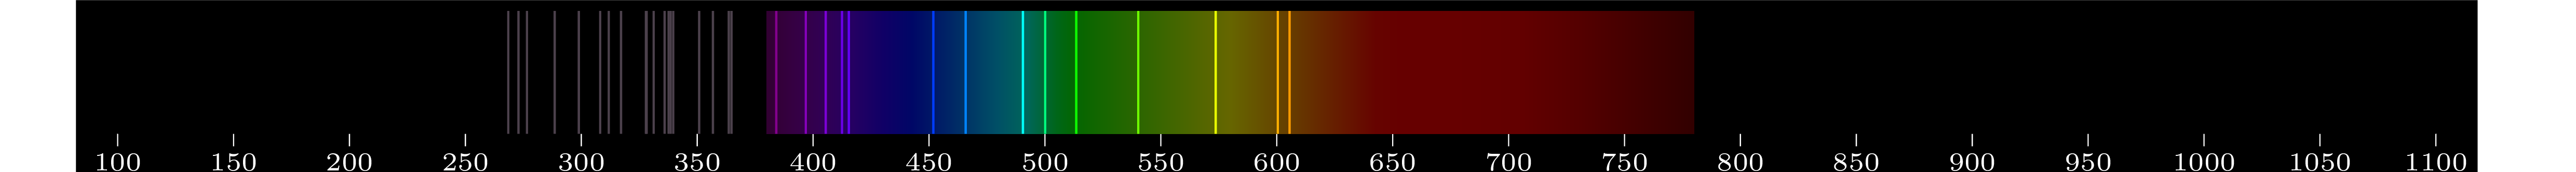 emmision spectra of element Lu